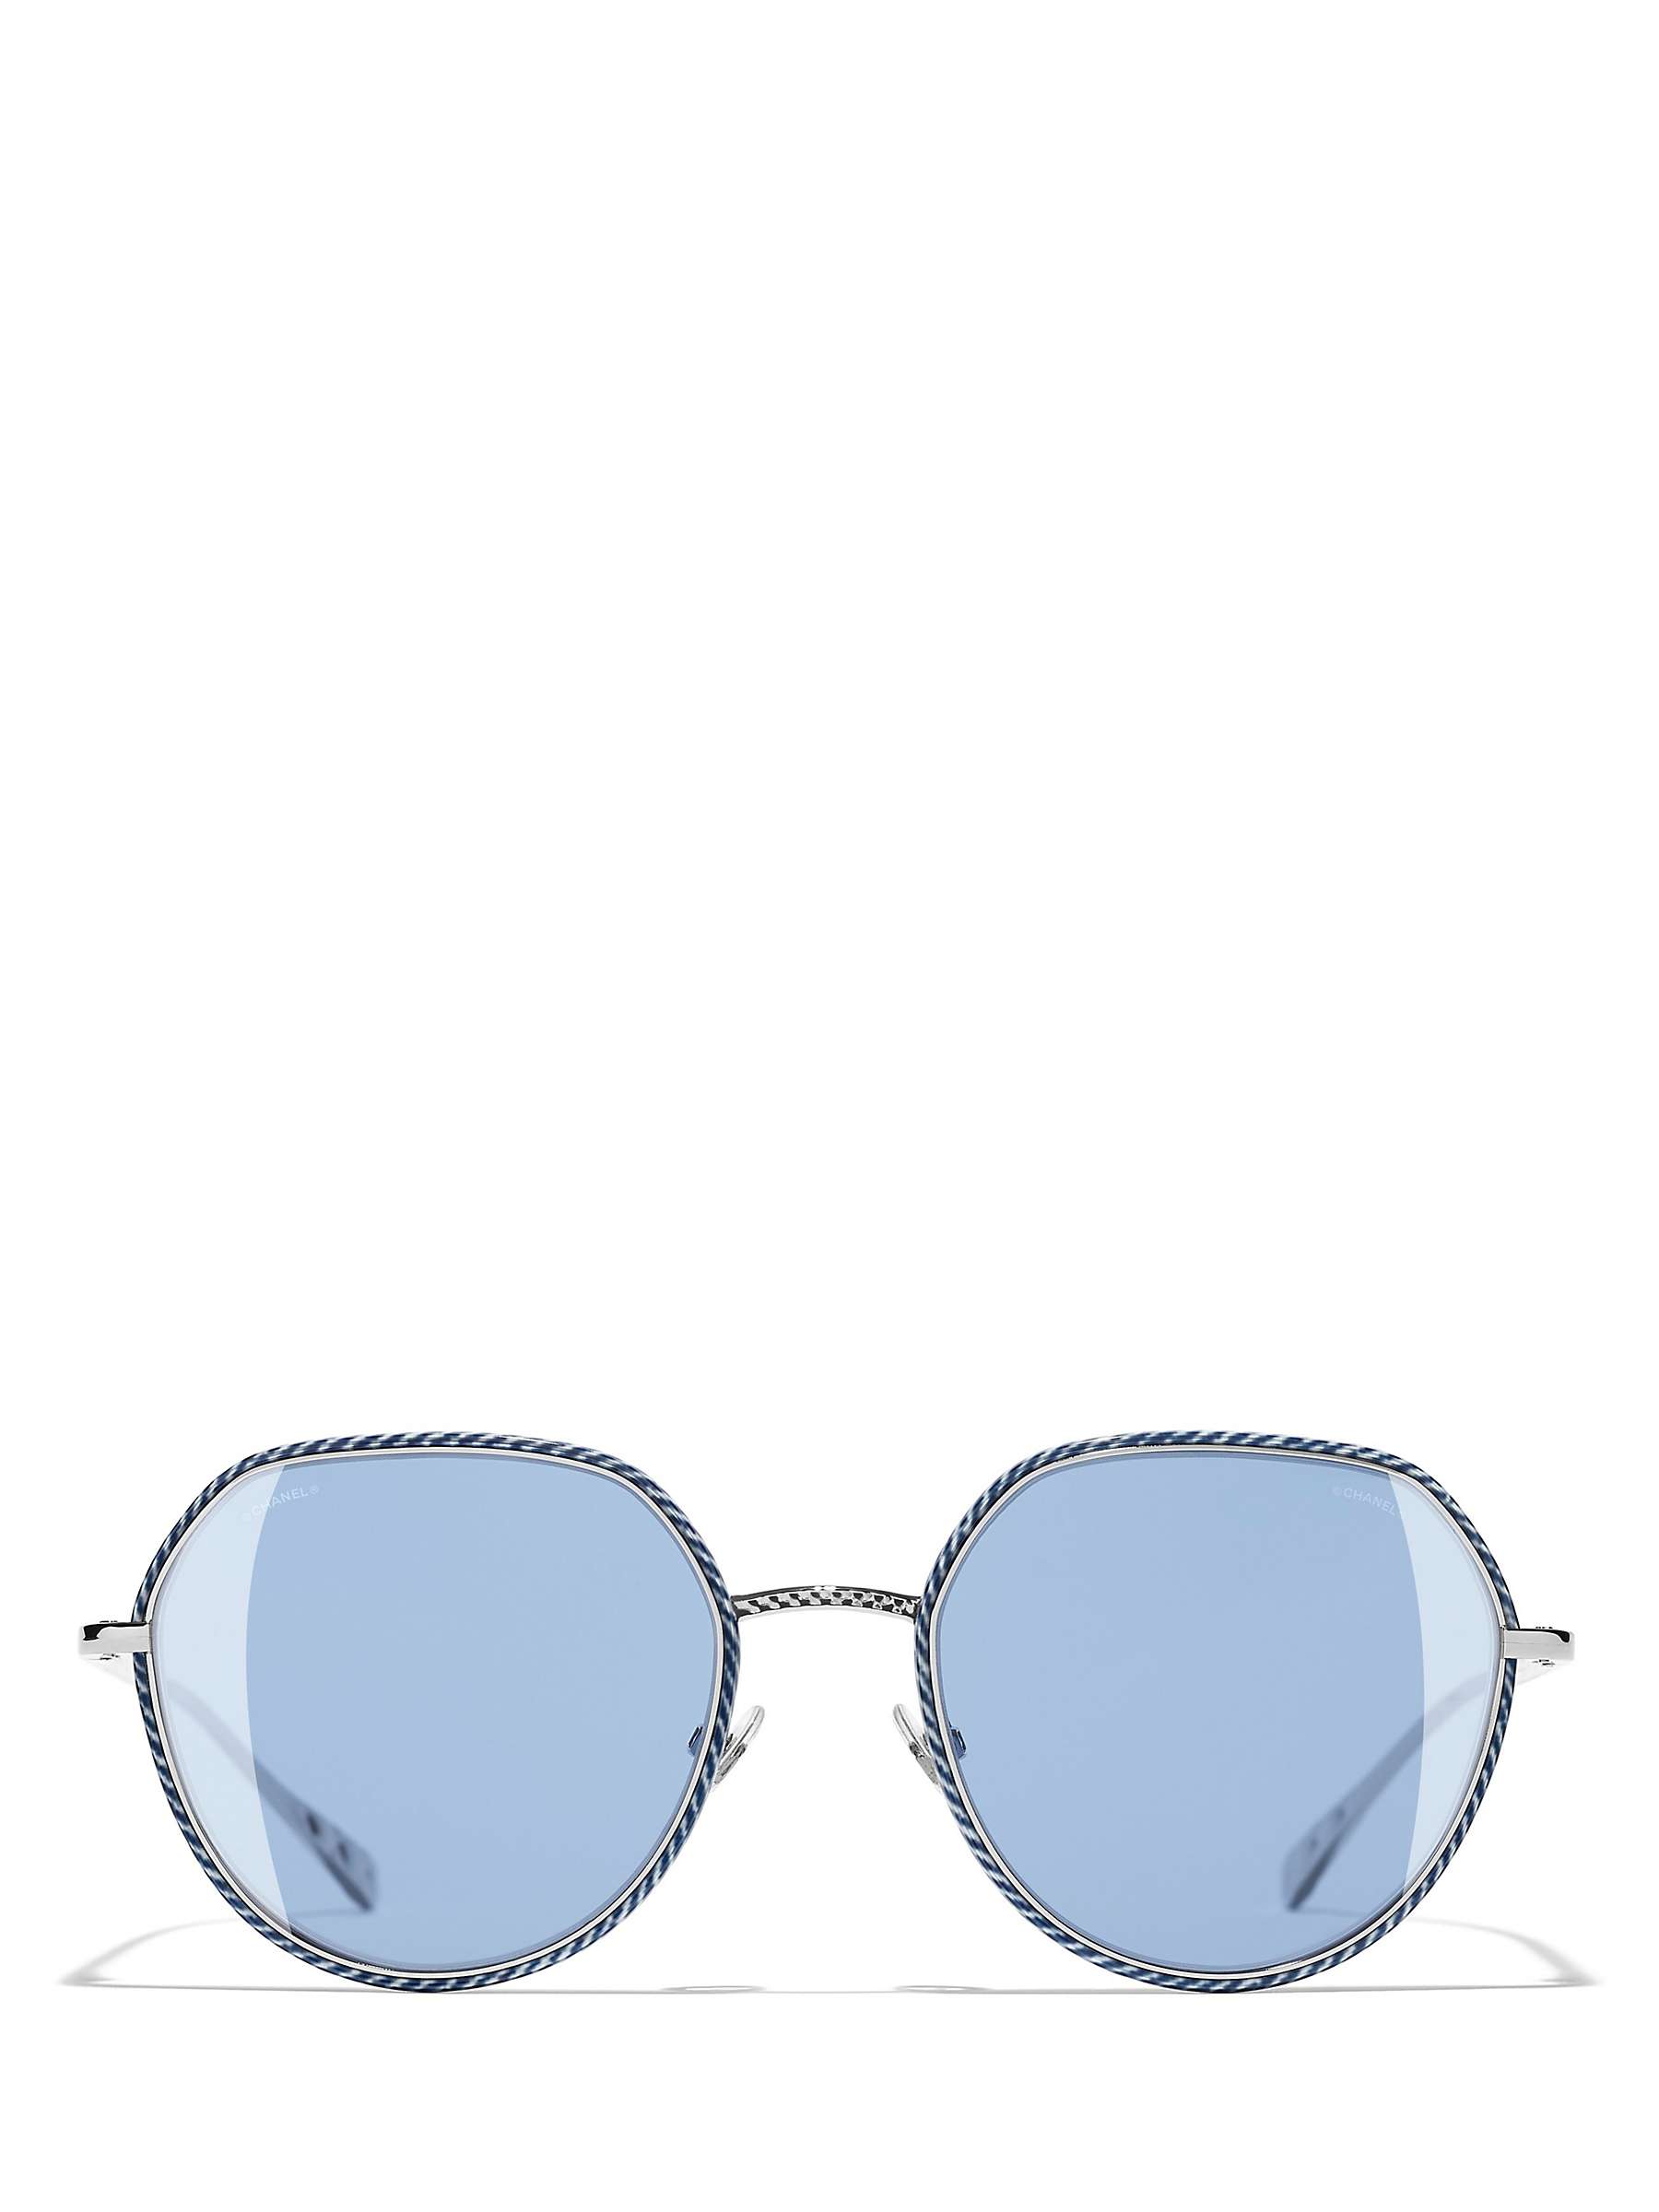 Buy CHANEL Round Sunglasses CH4251J Silver/Blue Online at johnlewis.com